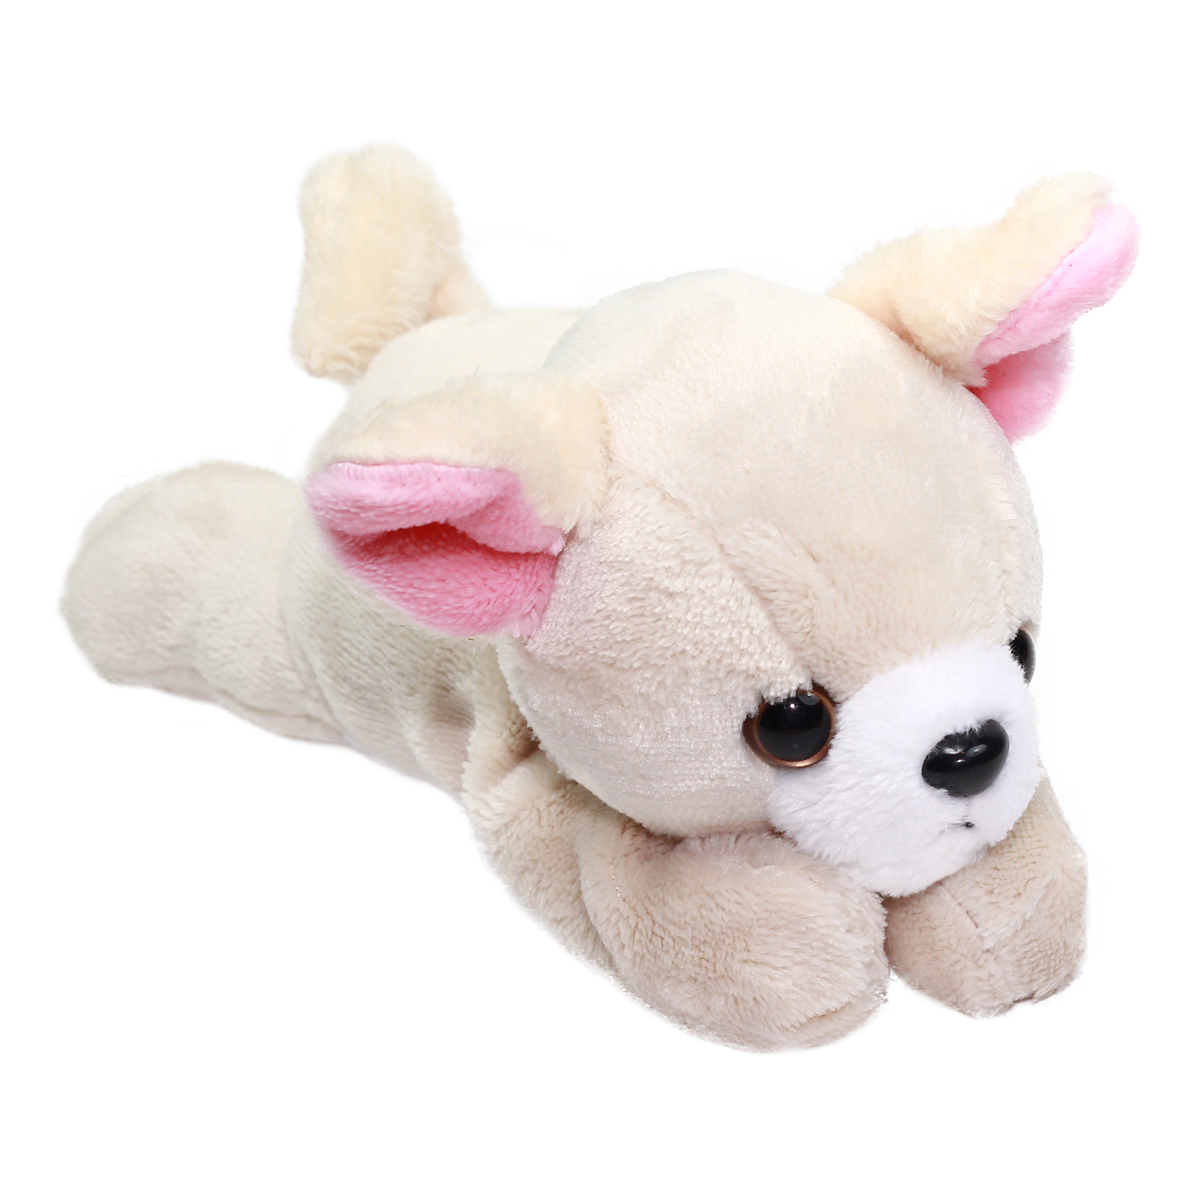 Kawaii Friends Dog Collection Beige Chihuahua Plush 9 Inches